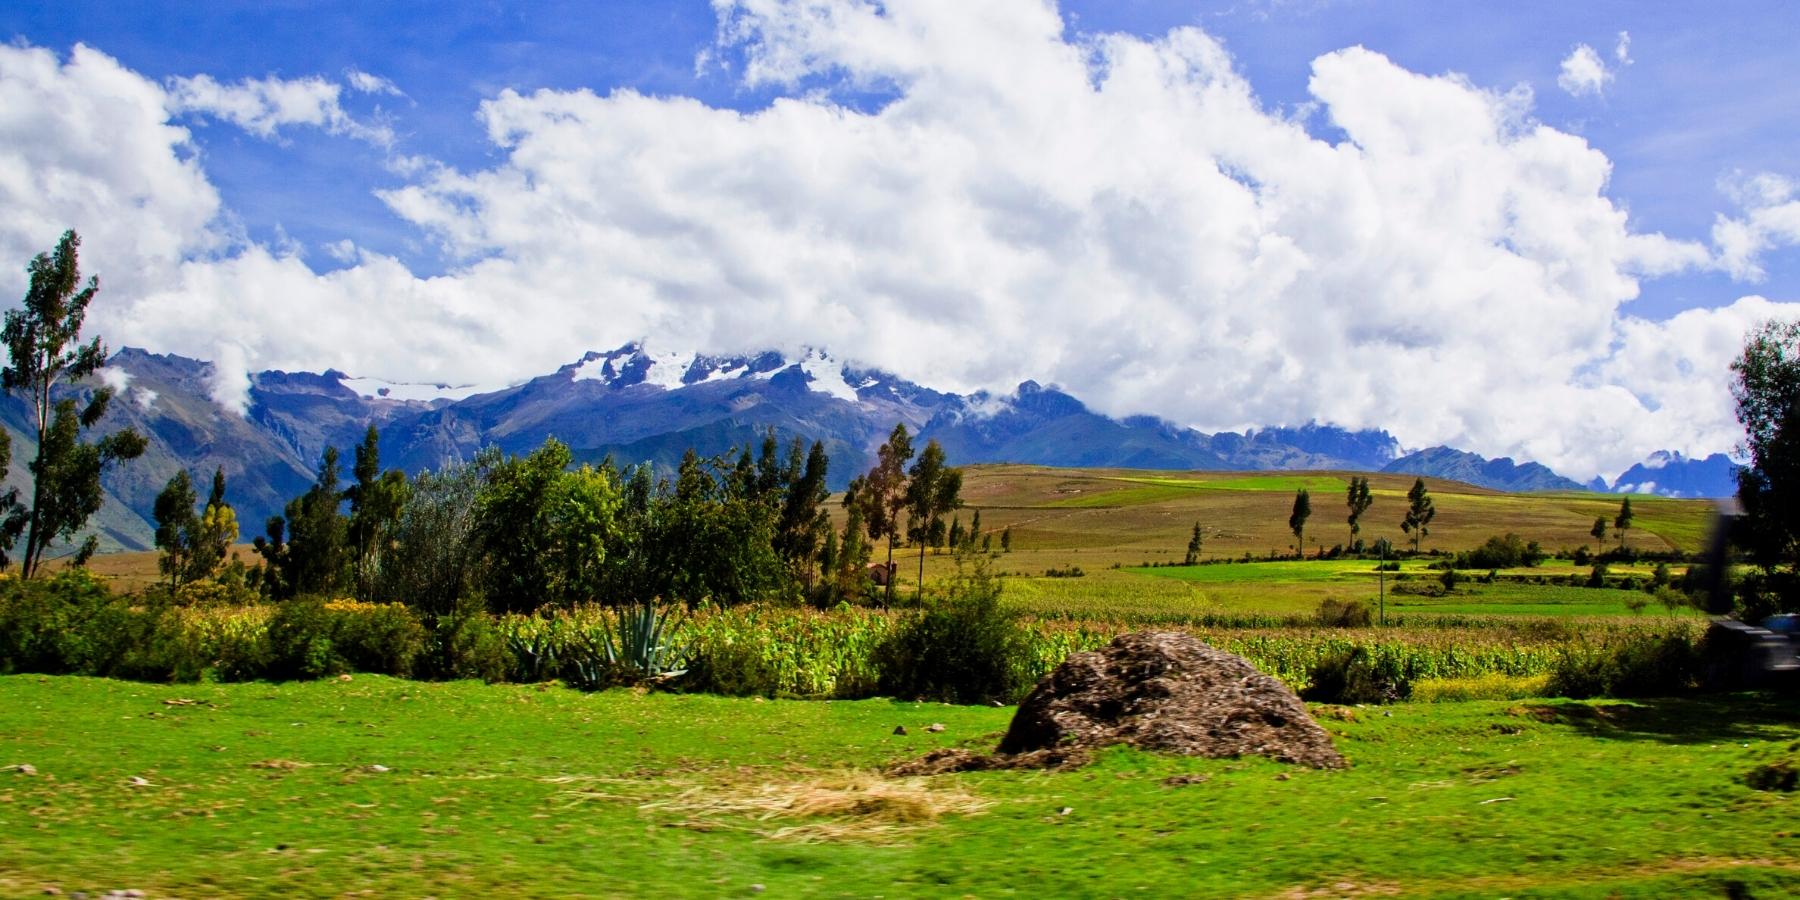 Tour to Machu Picchu & Sacred Valley of the Incas 2 Days | Inca Trail Expeditions